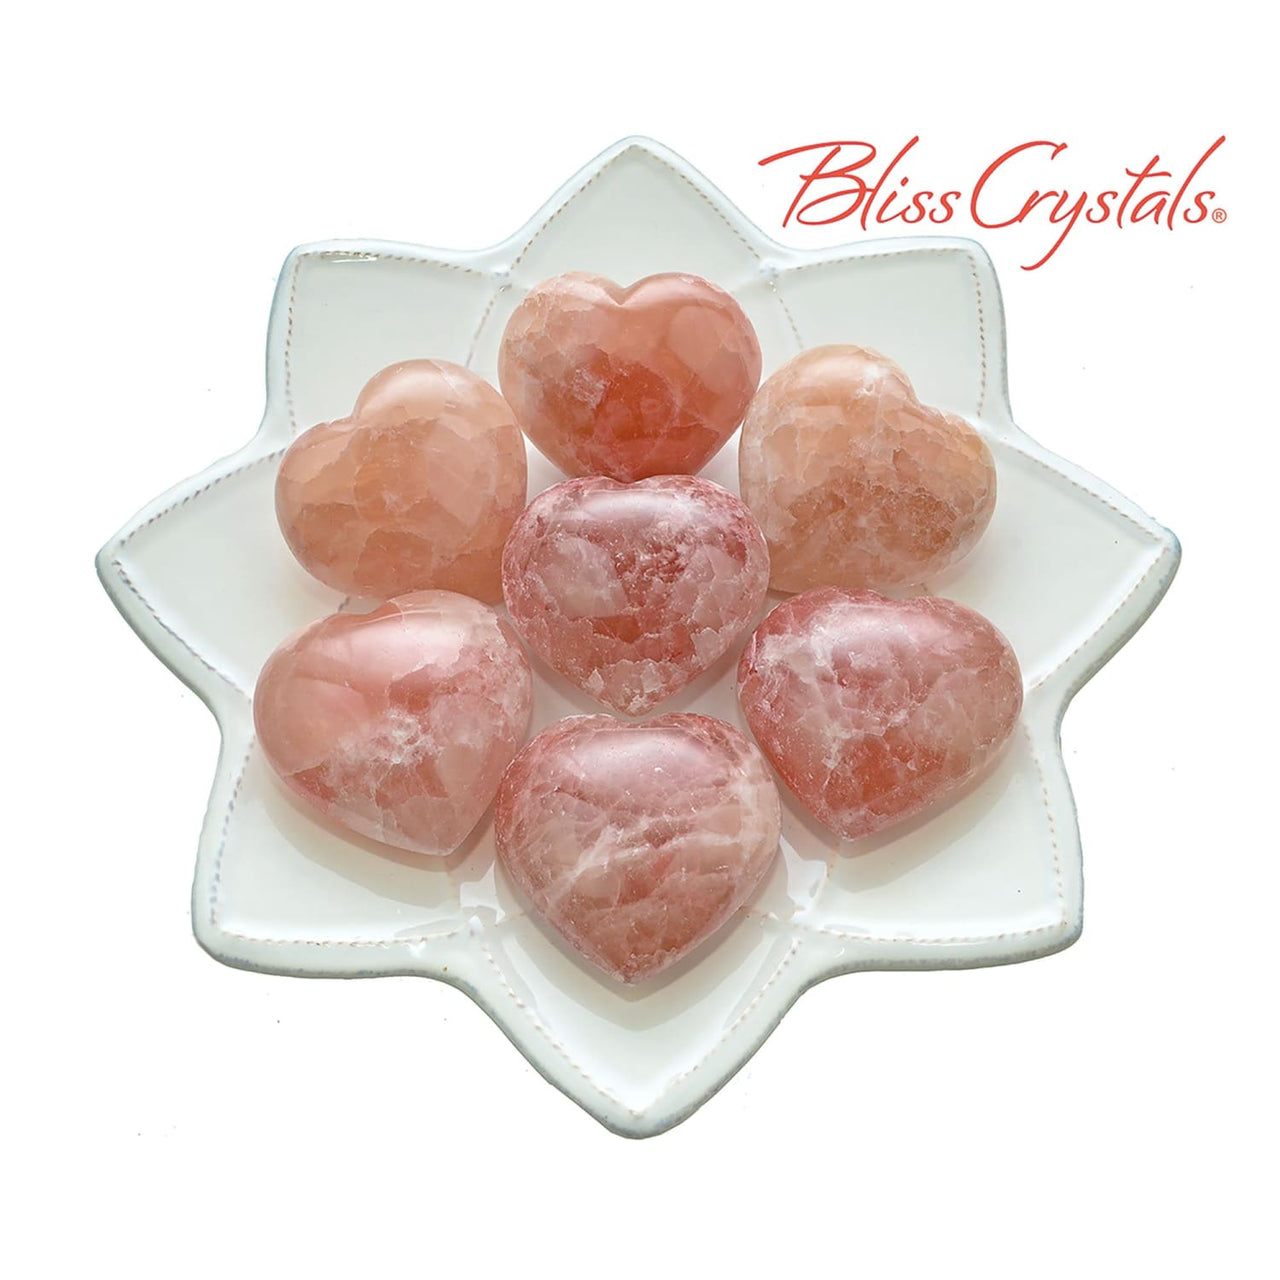 1 PINK CALCITE 2 Heart Stone Healing Crystal and Stone for 